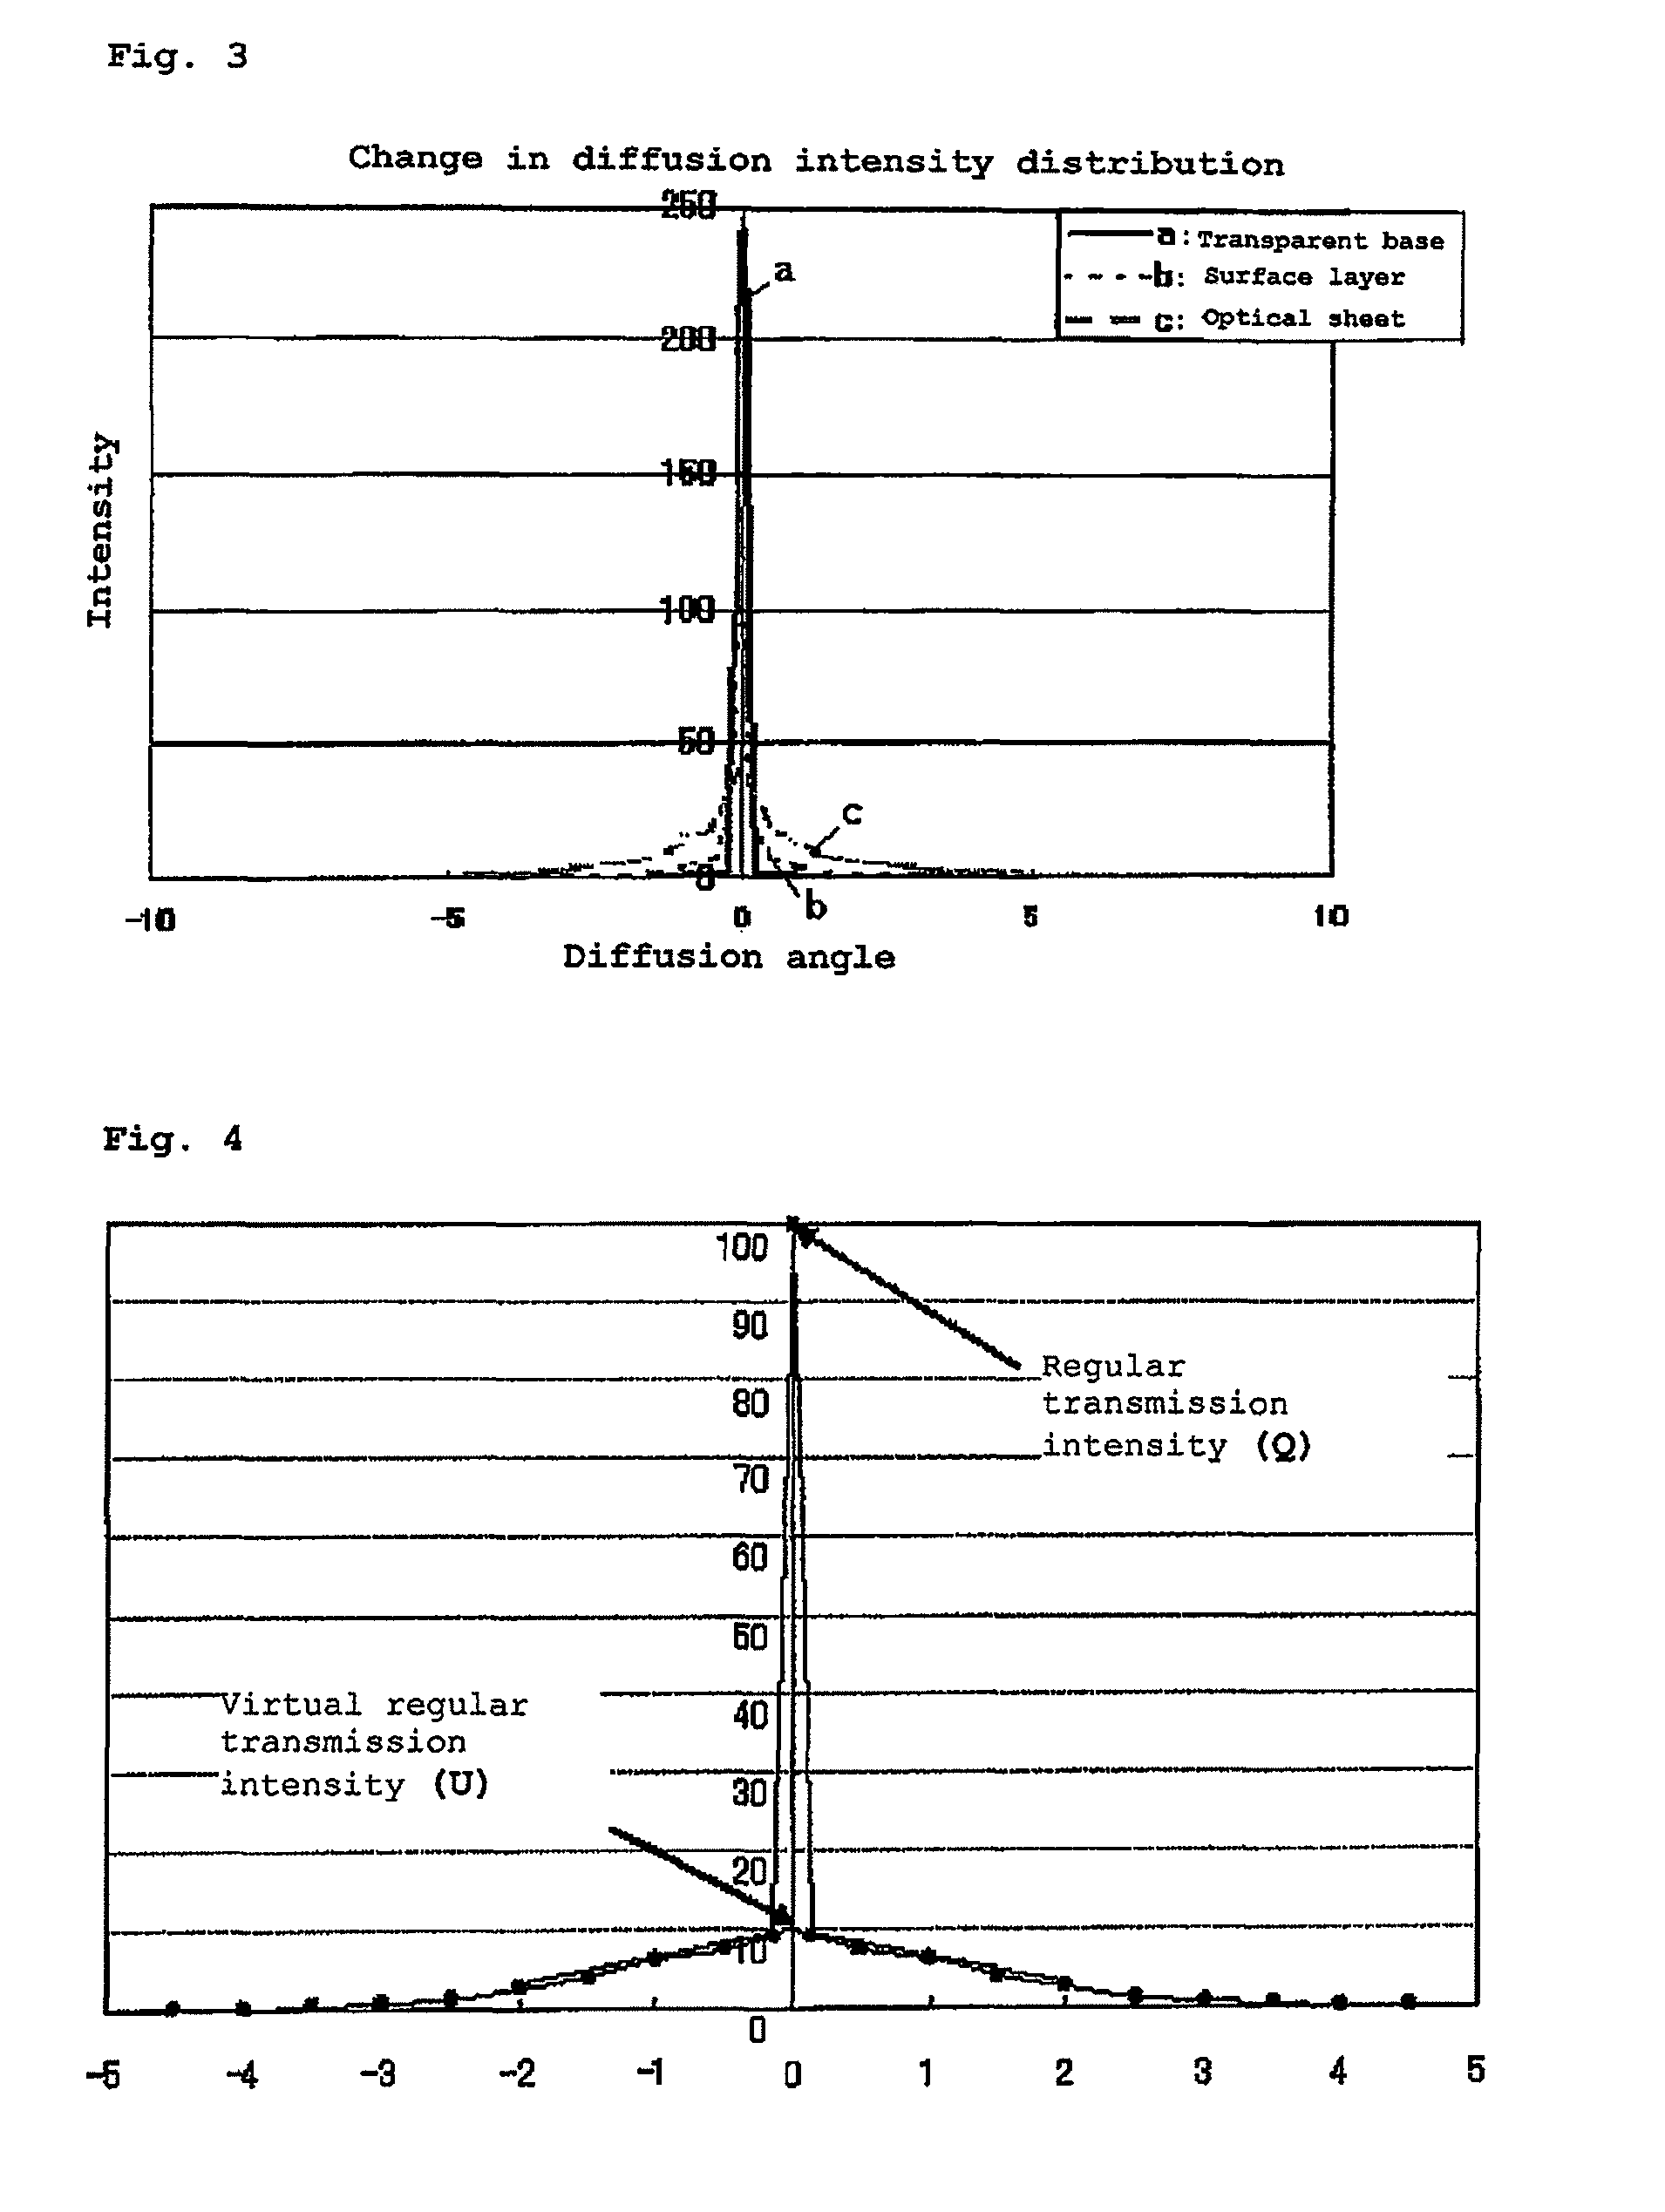 Optical sheet for use as a display surface